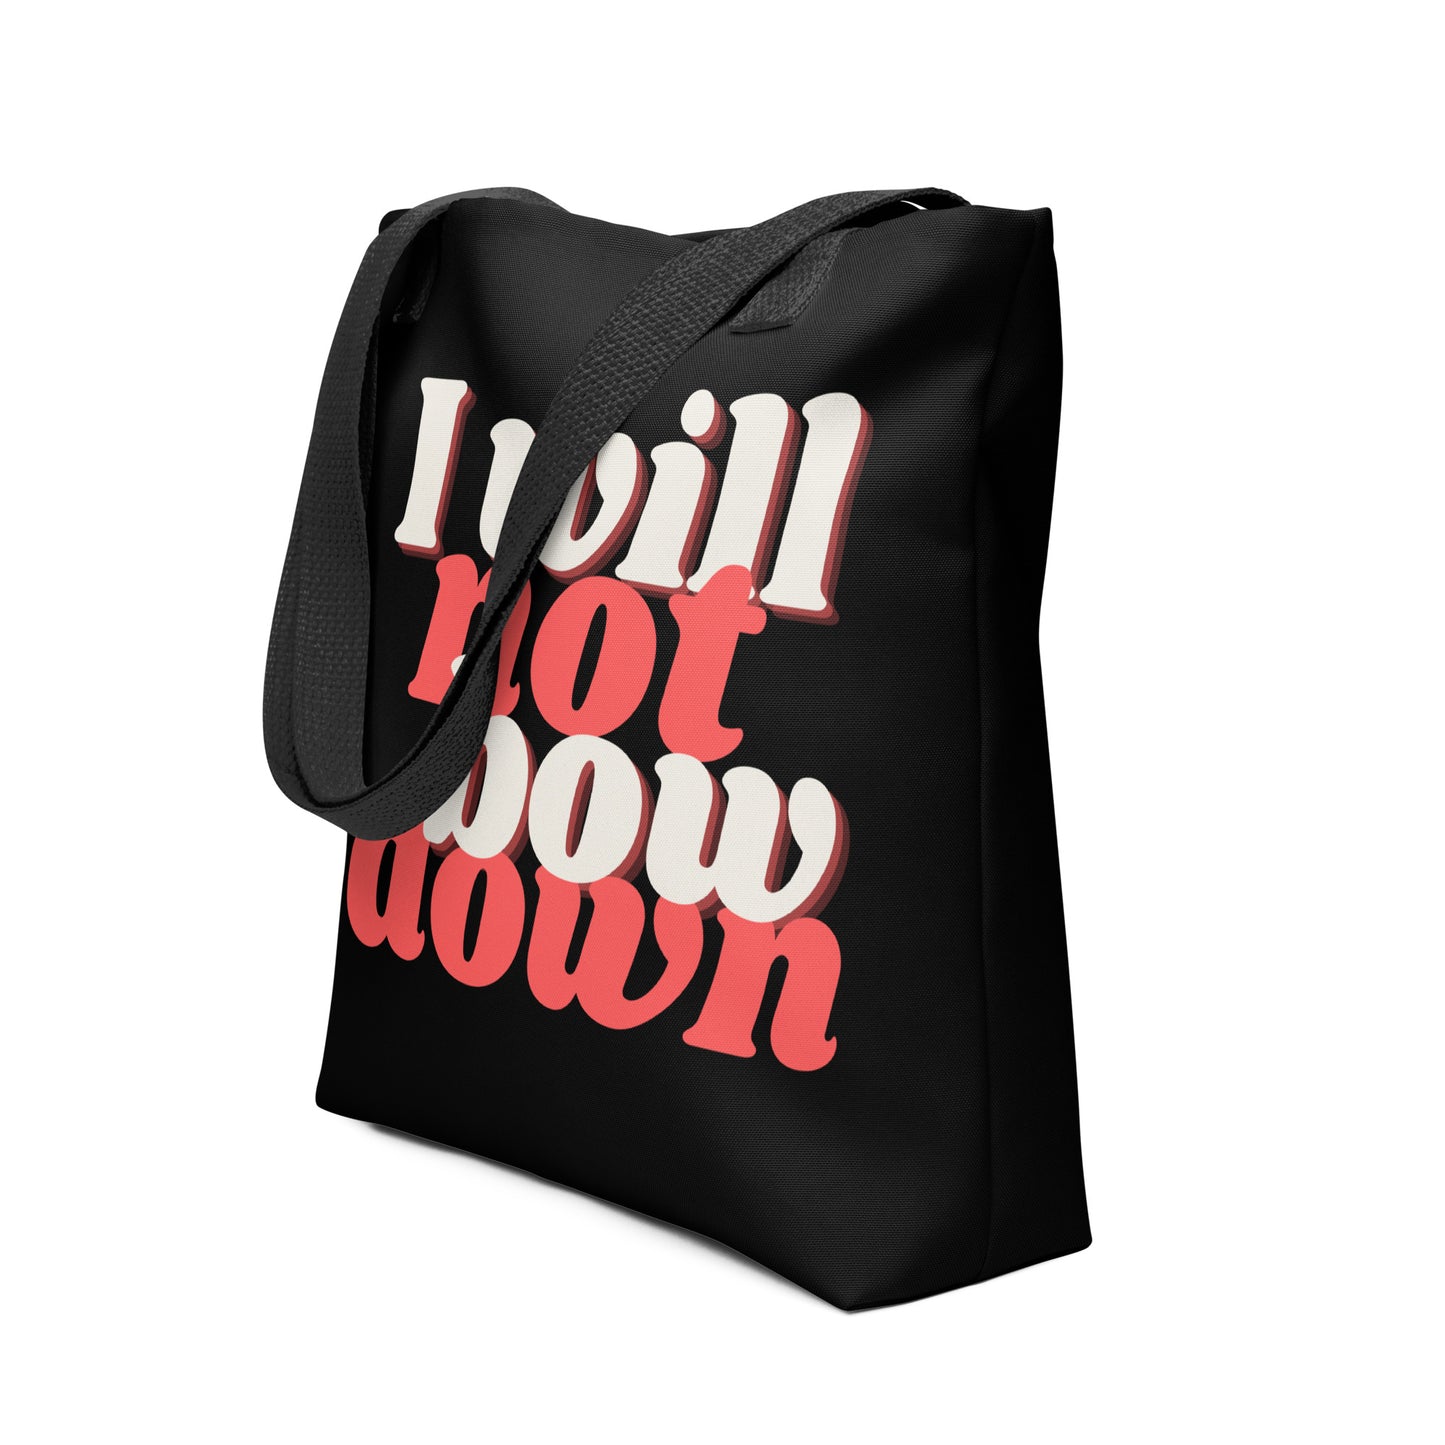 Defiant Tote - Limited Edition